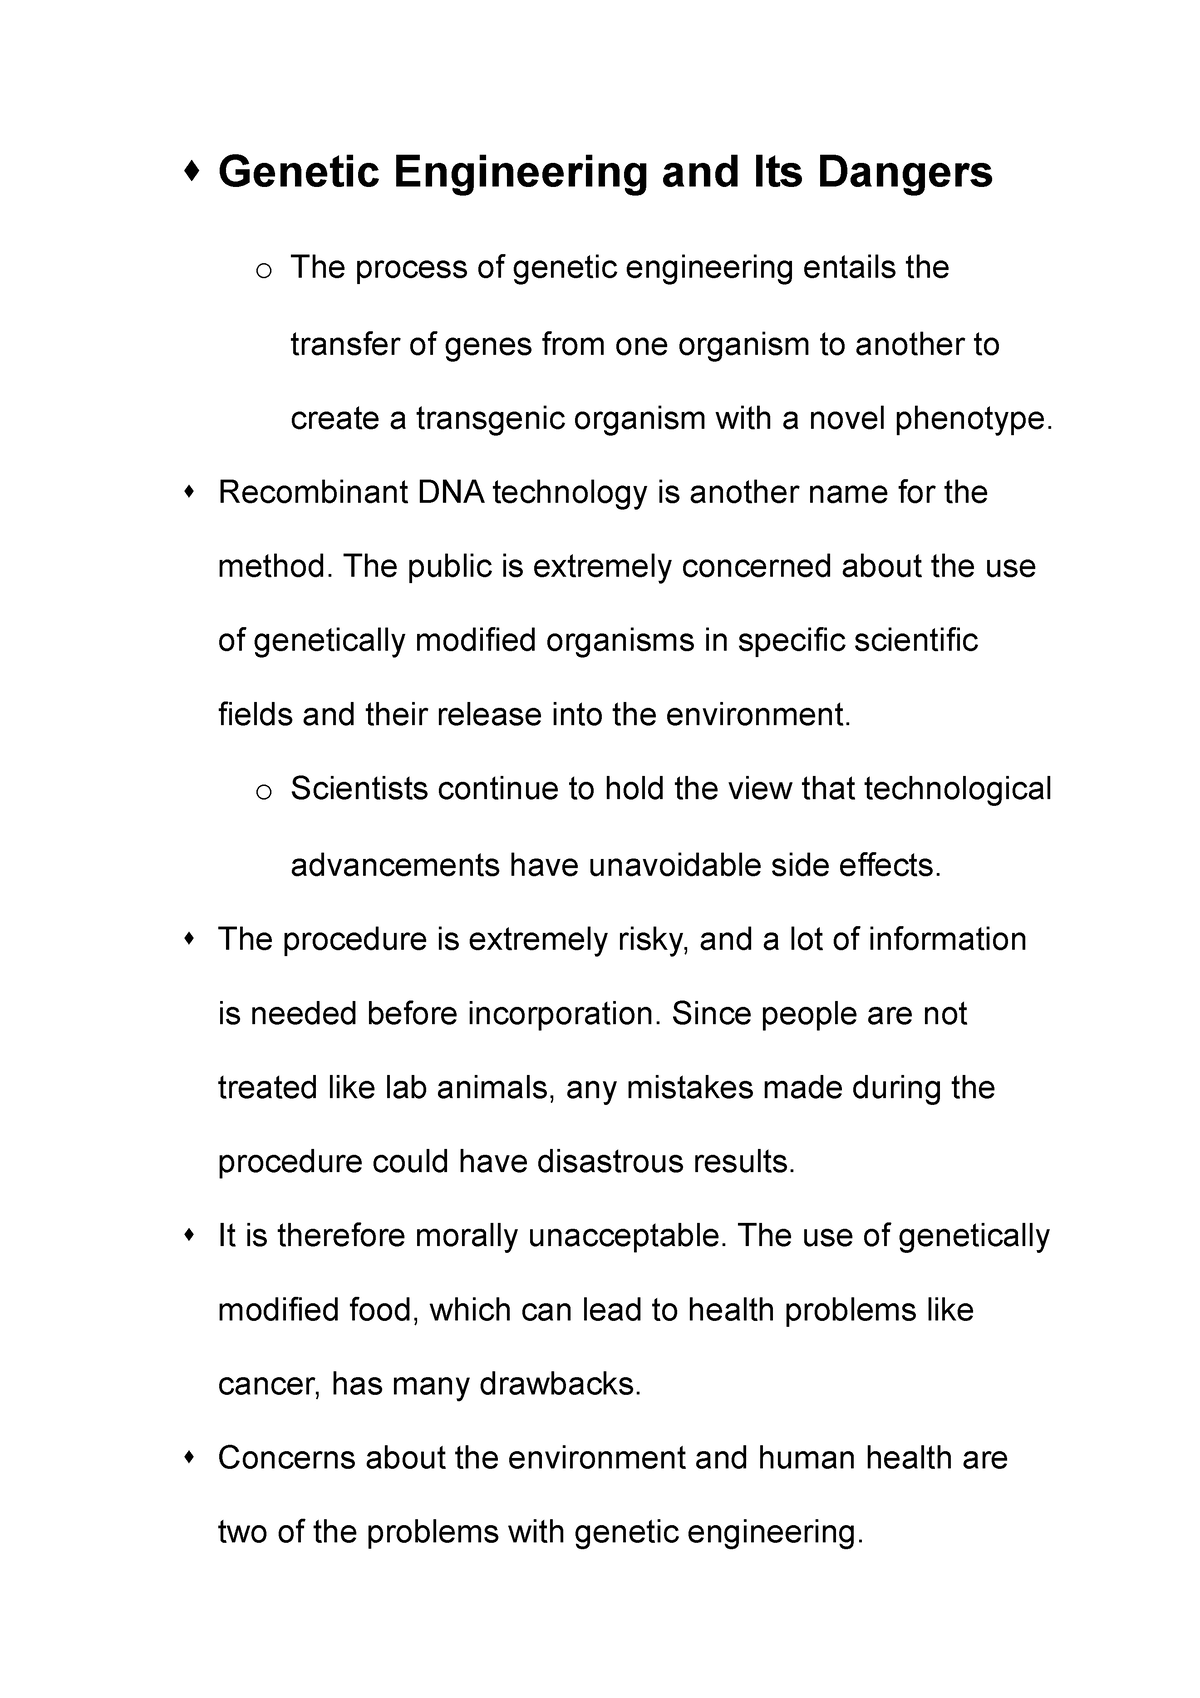 genetic engineering and its dangers essay in apa format